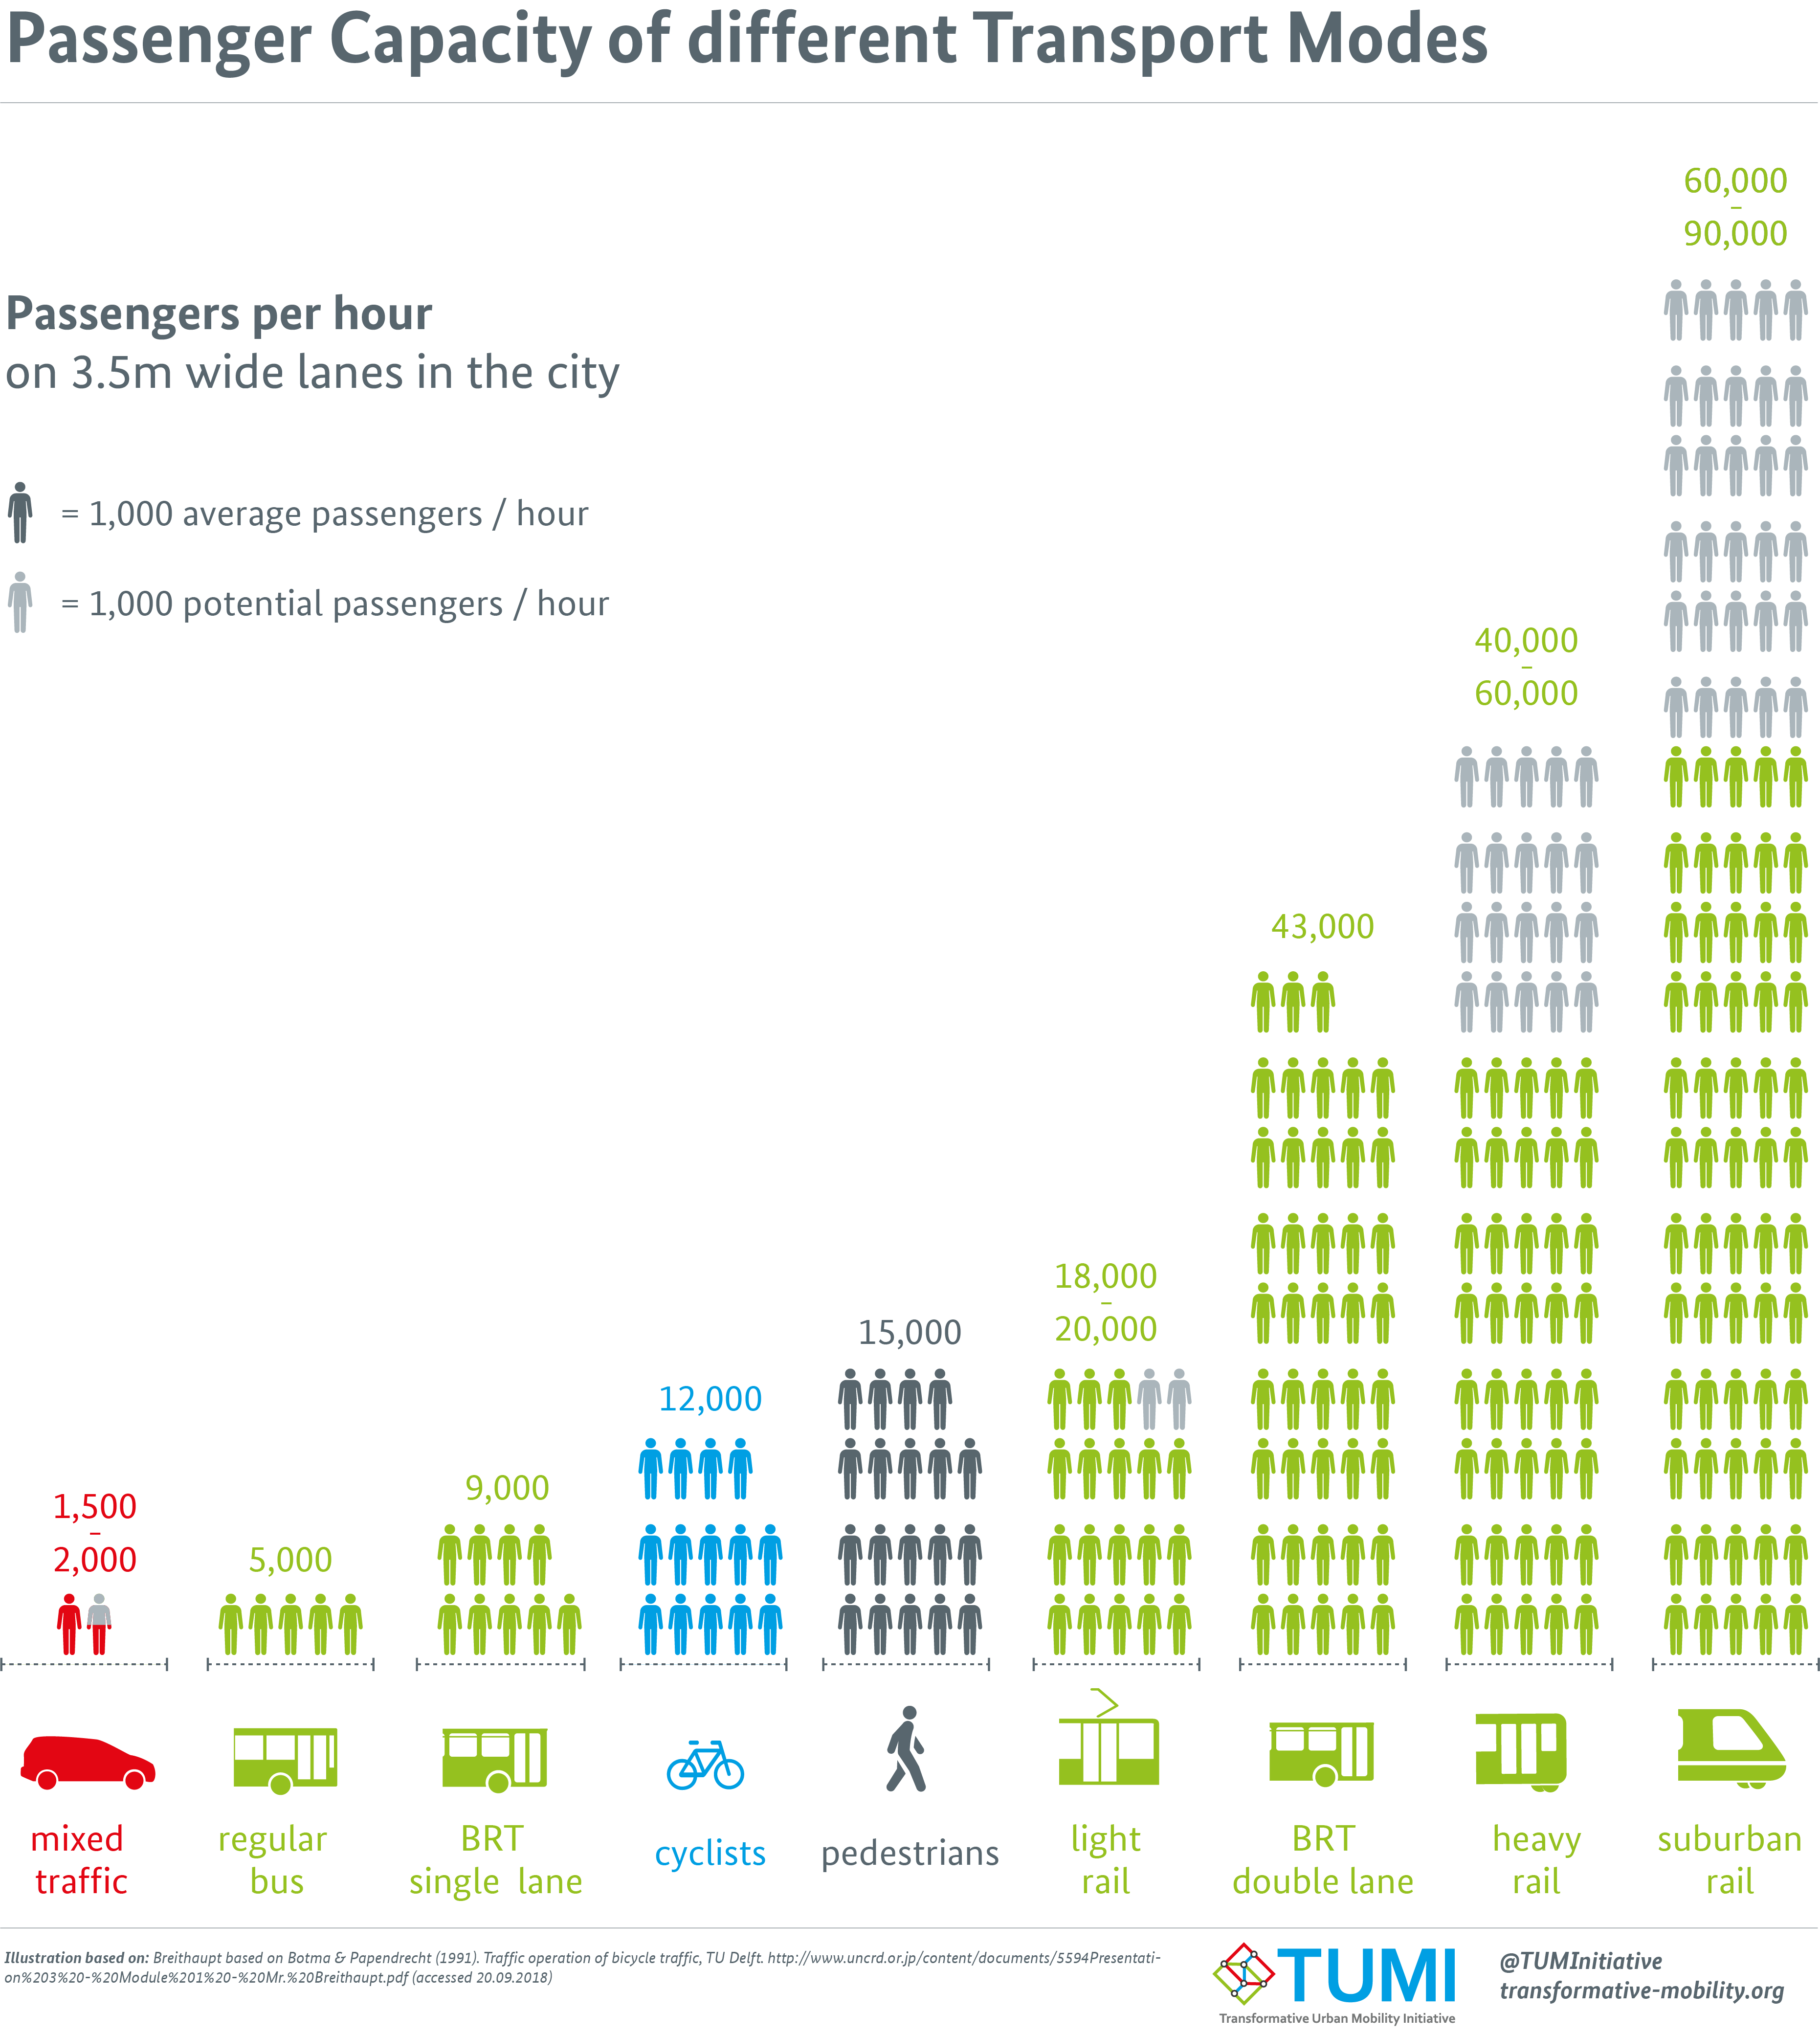 Graph showing passenger carrying capacity per unit area of roadway - with cars the worst, walking and cycling in the middle, and rapid transit by far the best